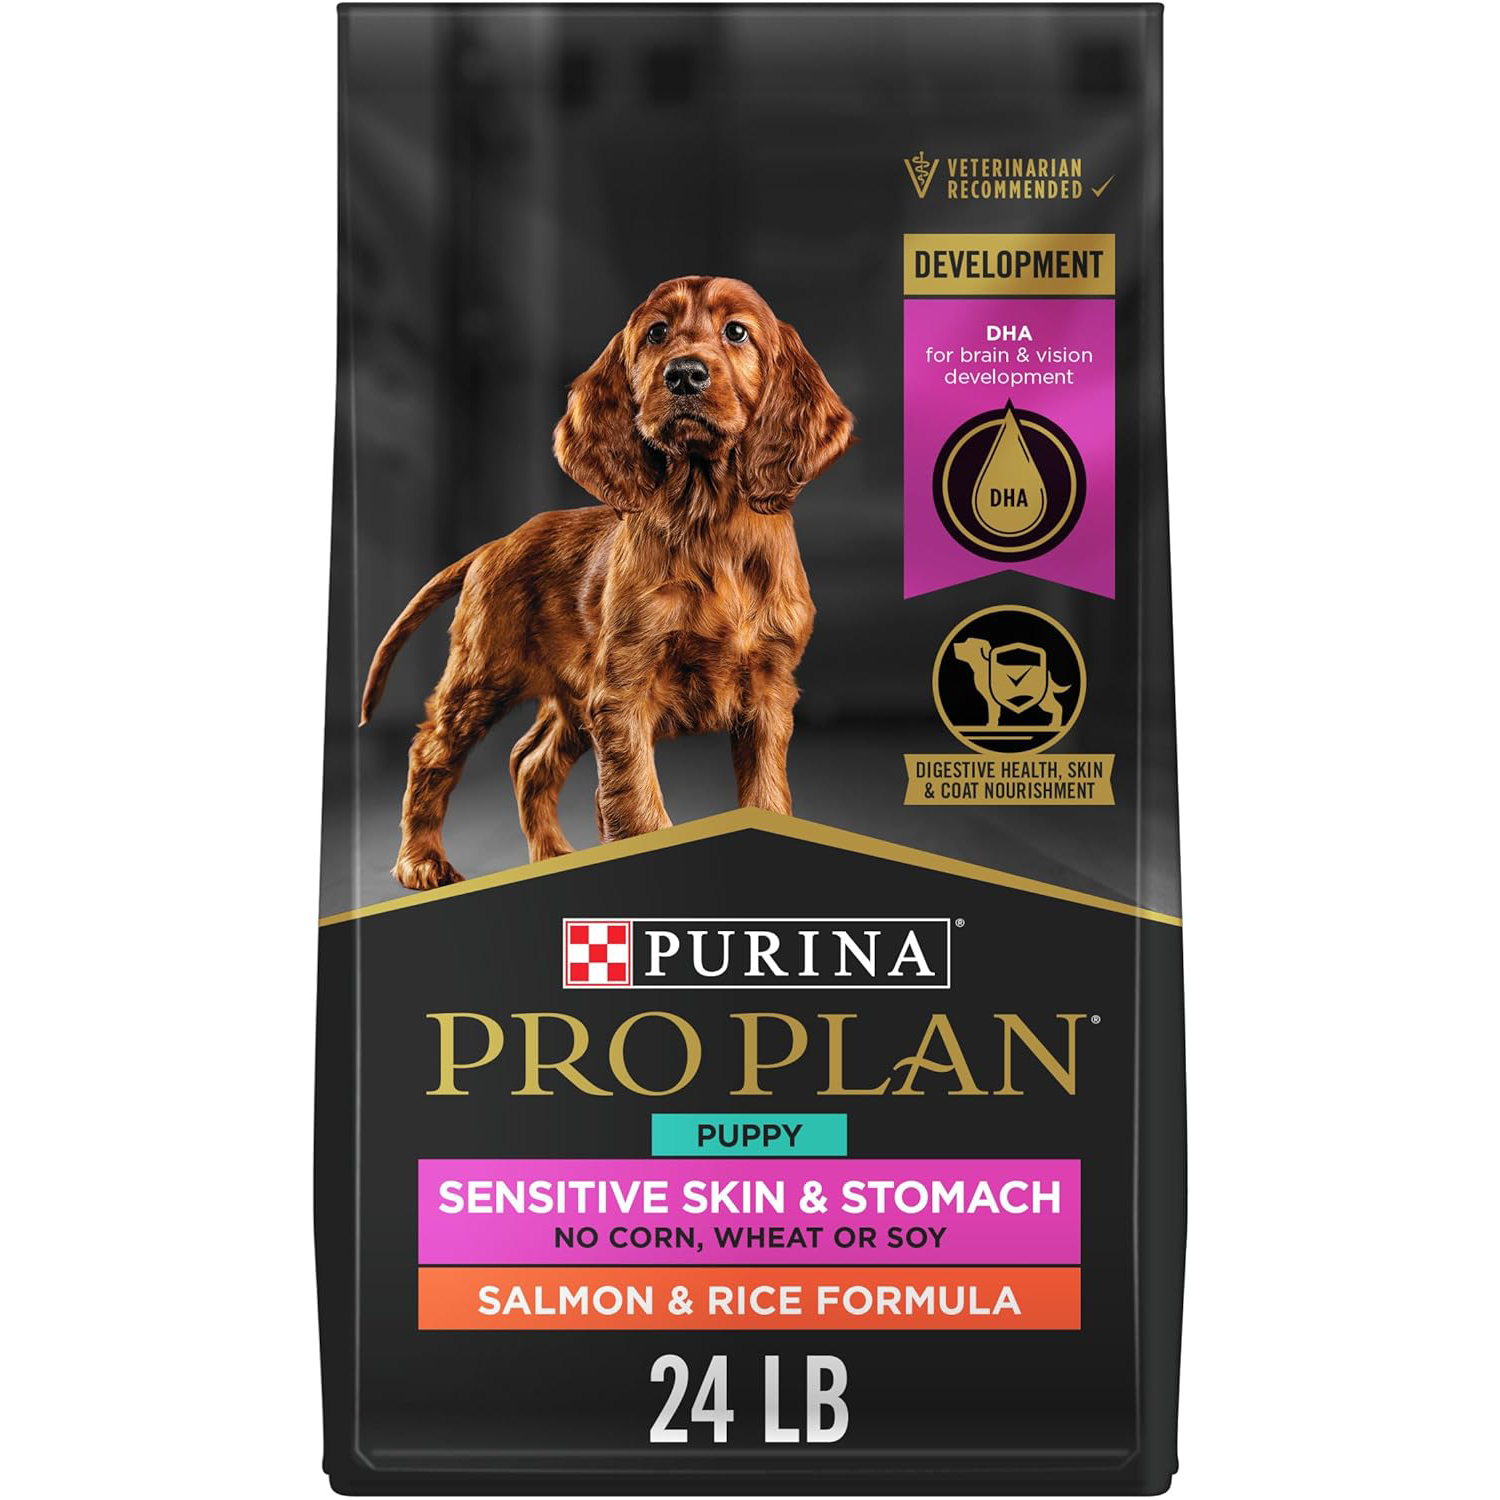 New Project Purina Pro Plan Sensitive Skin and Stomach Dog Food Puppy Salmon and Rice Formula 